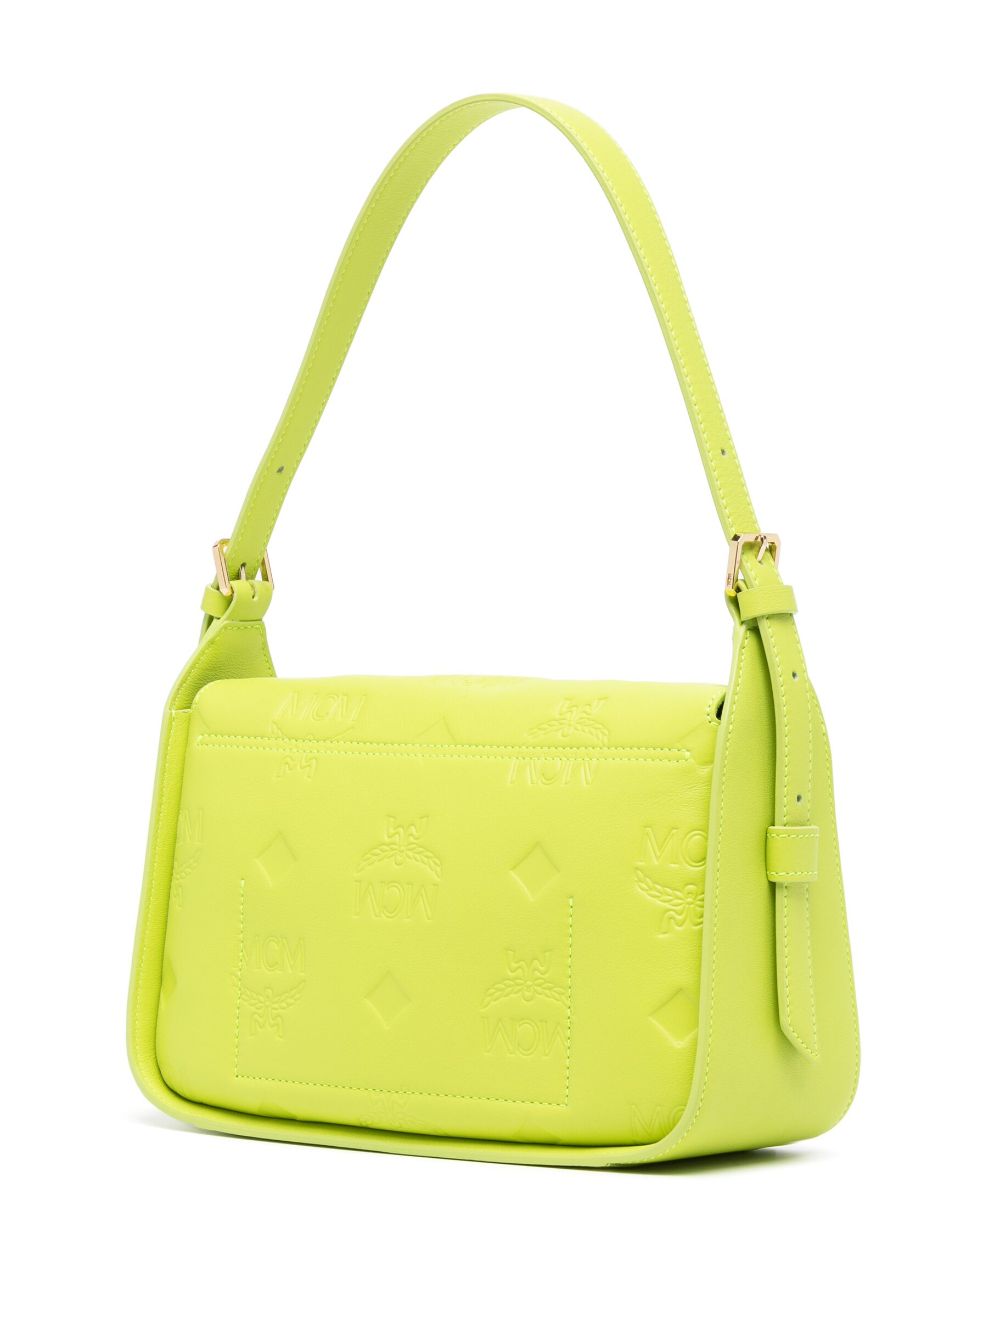 Mcm Pre-owned Women's Leather Shoulder Bag - Green - One Size